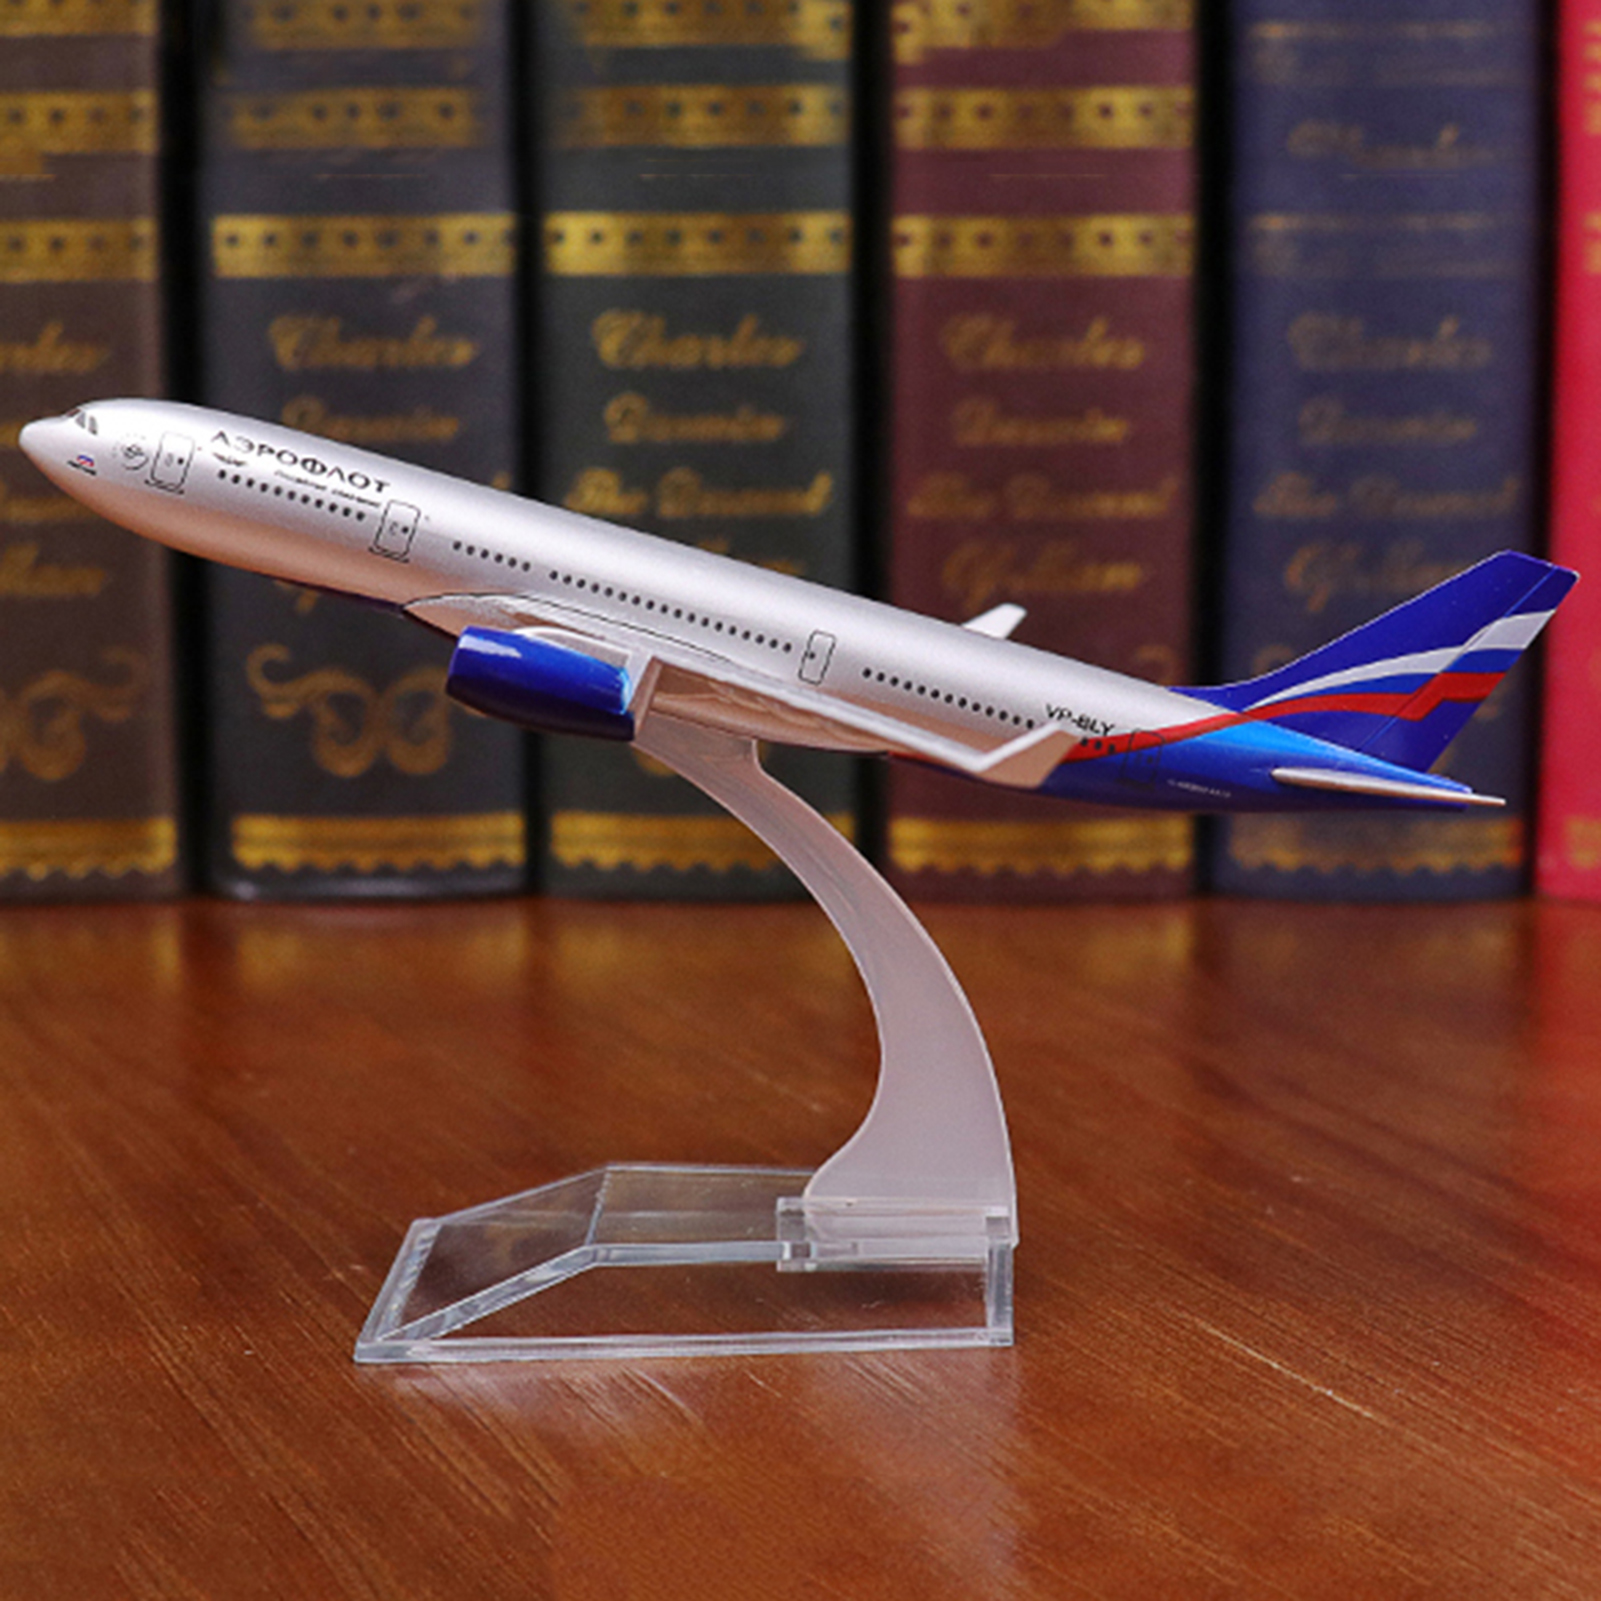 16cm Desktop Toy Metal Aircraft Model Aircraft Boeing Die Casting Airline XM